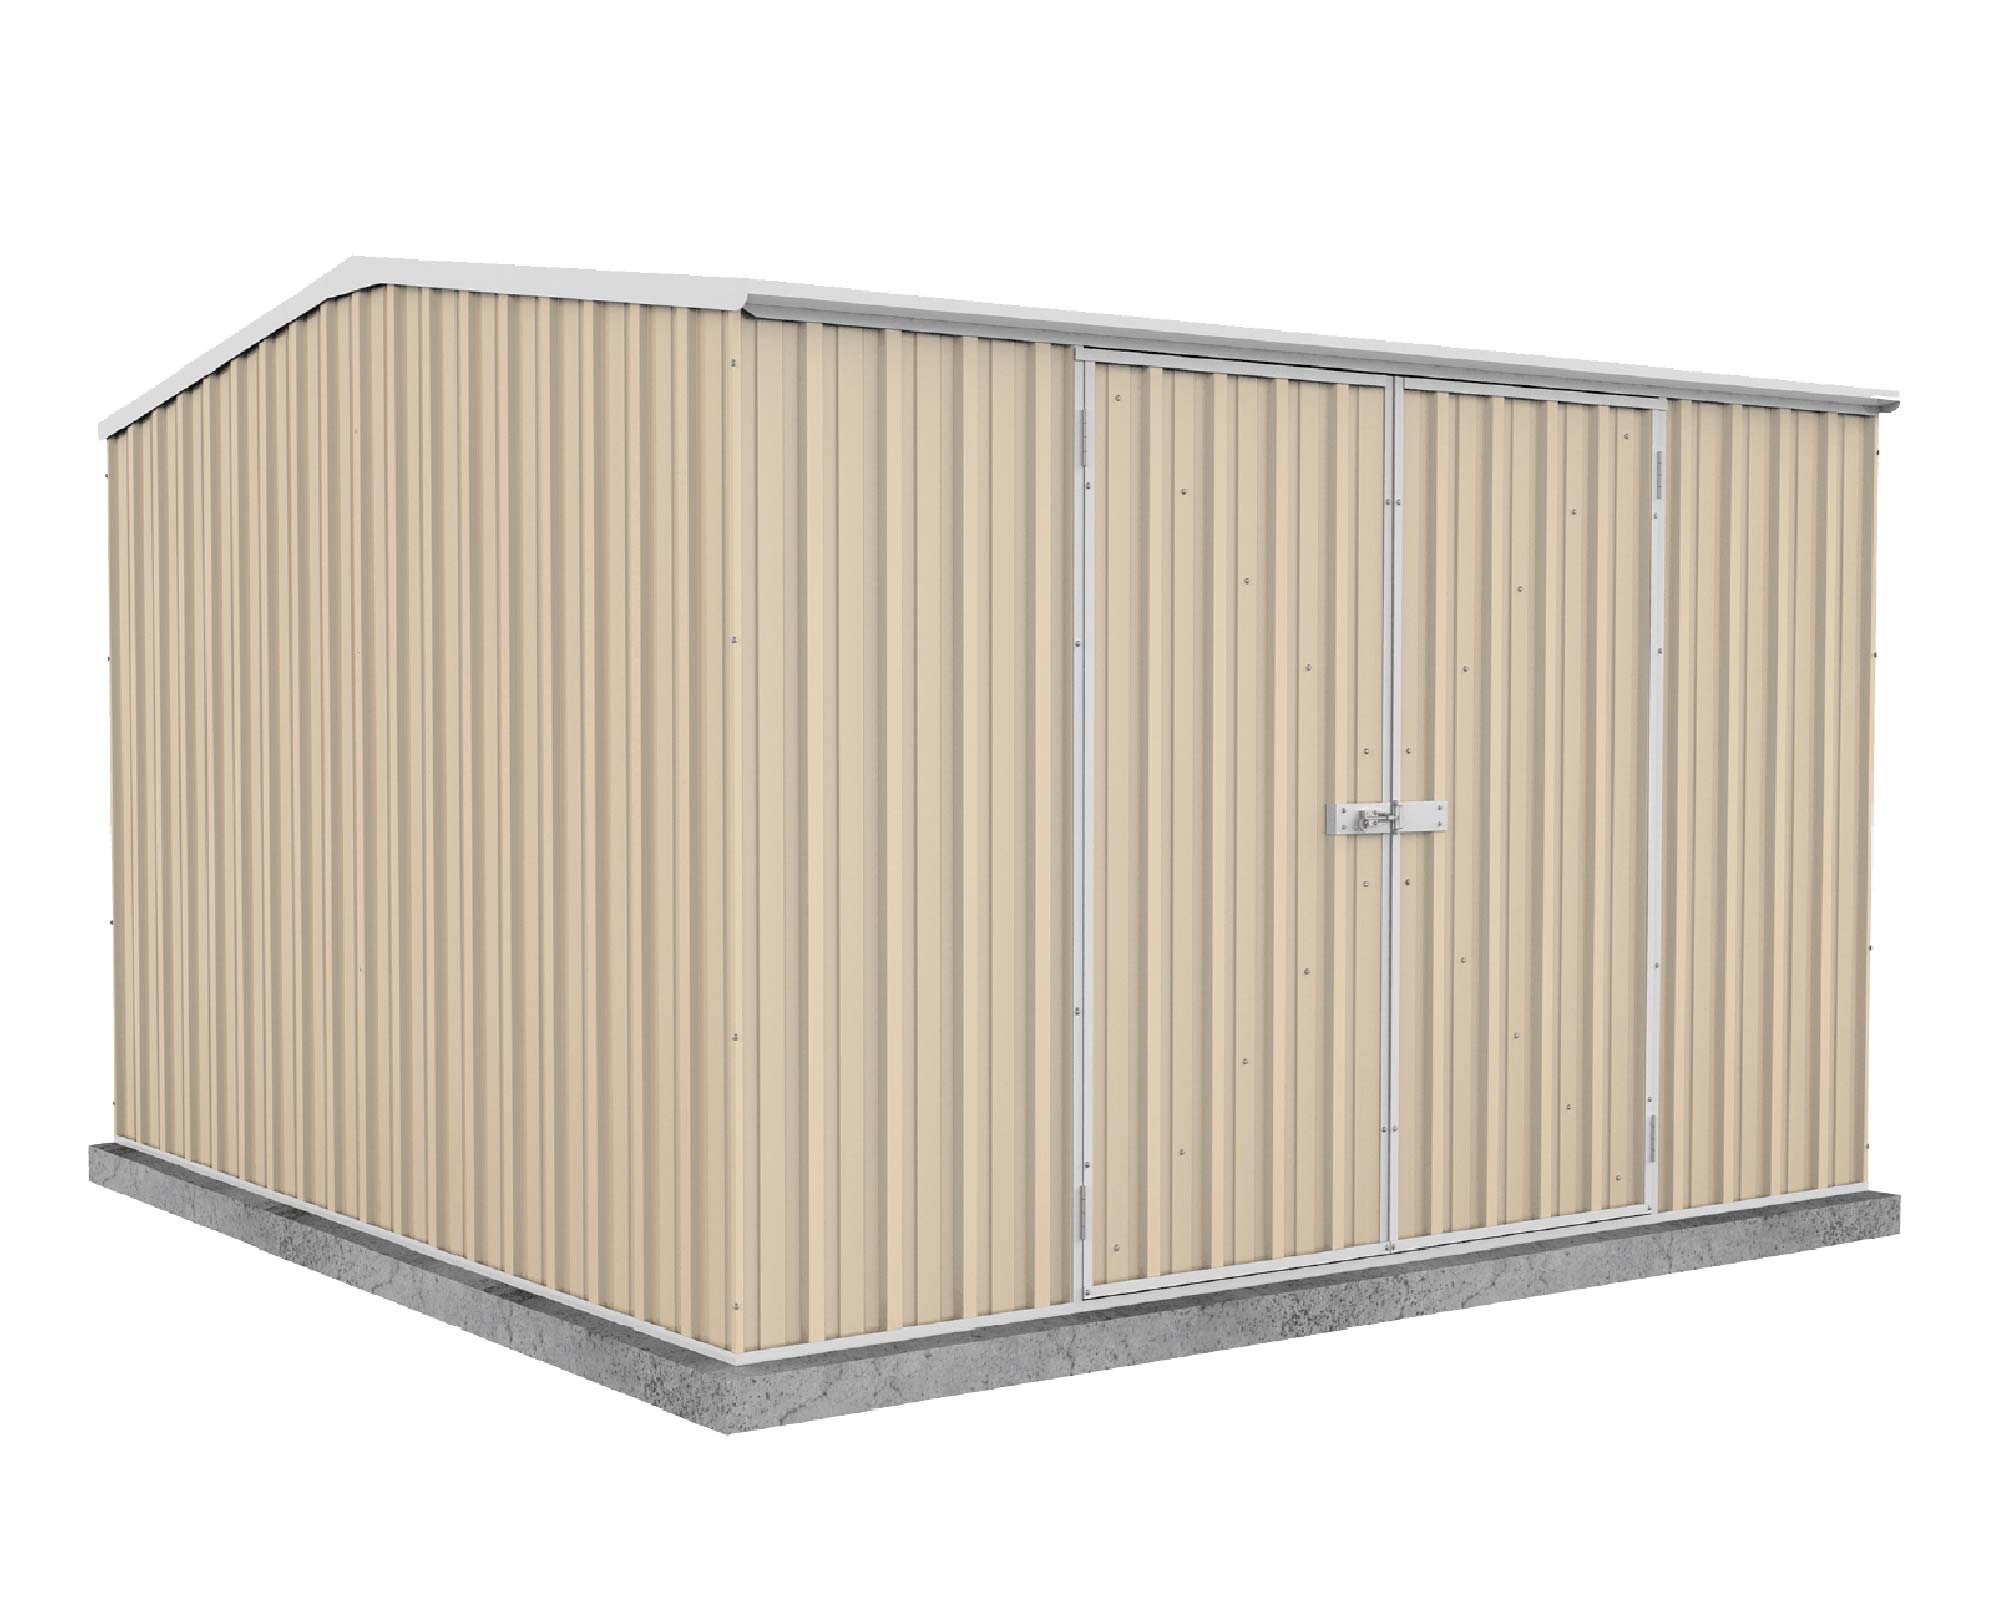 ABSCO Eco-Nomy Shed with Double Doors Kit - 3mx 3m x 2.06m - Cream